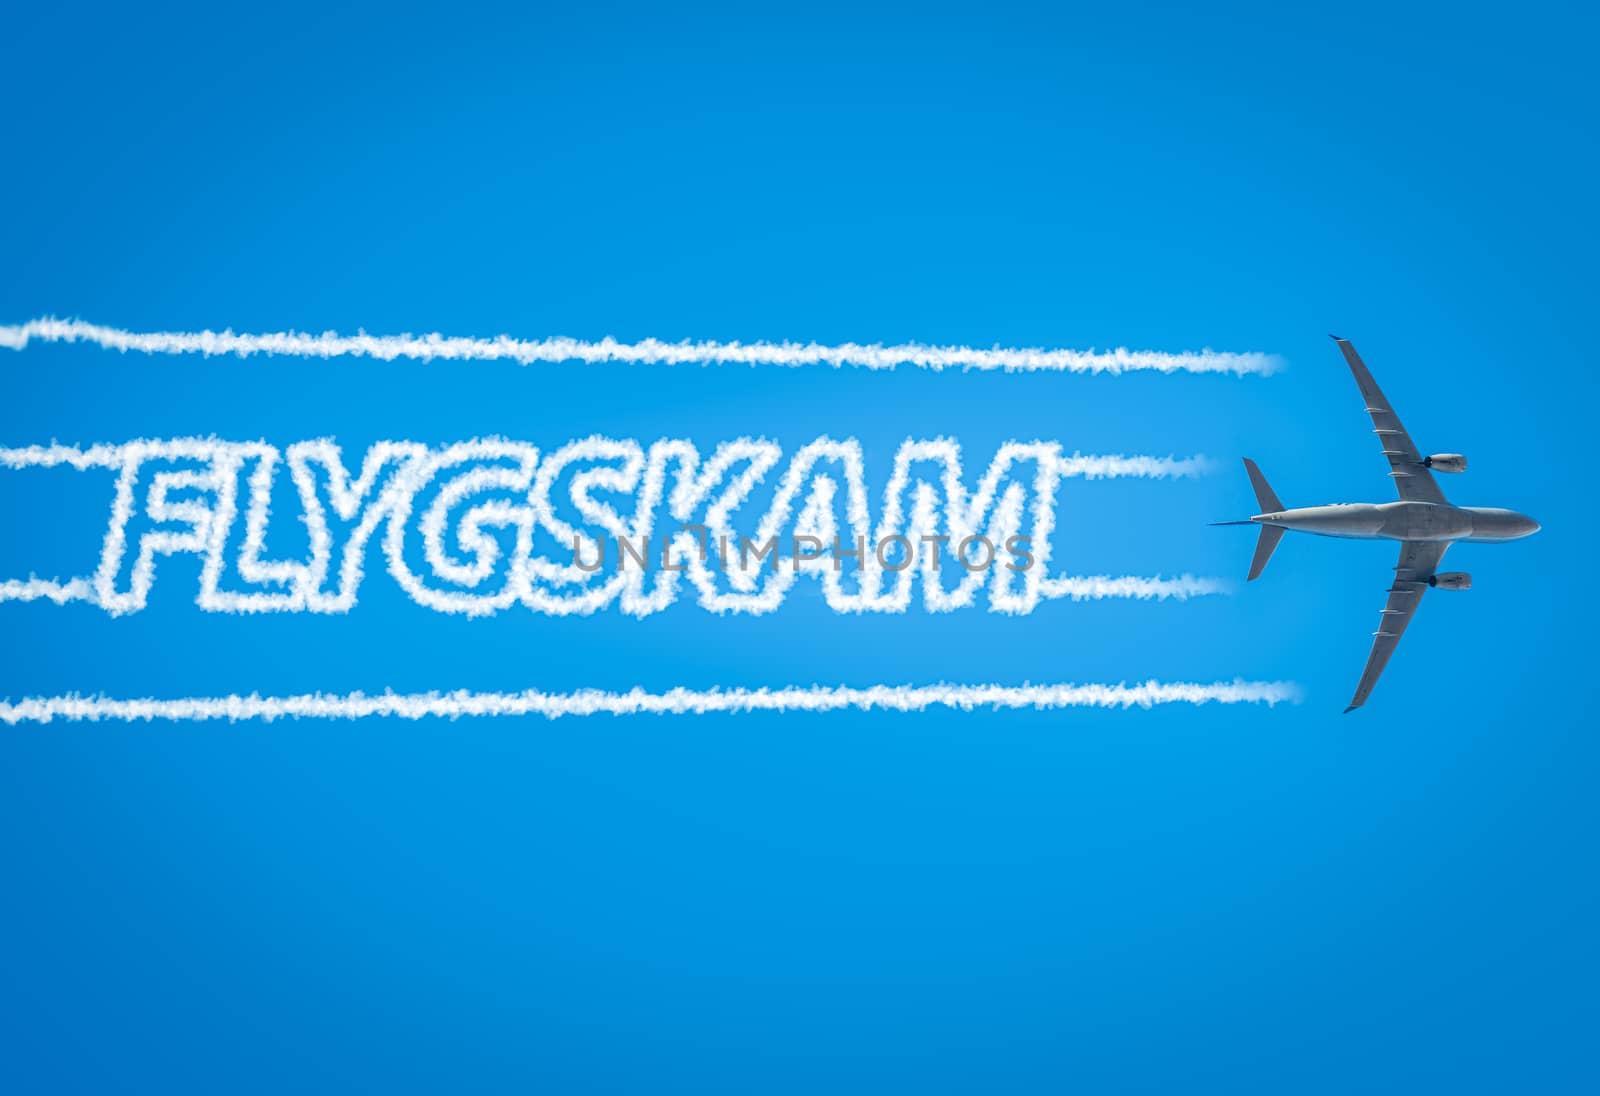 Airplane leaving jet contrails with Flygskam word inside by tanaonte